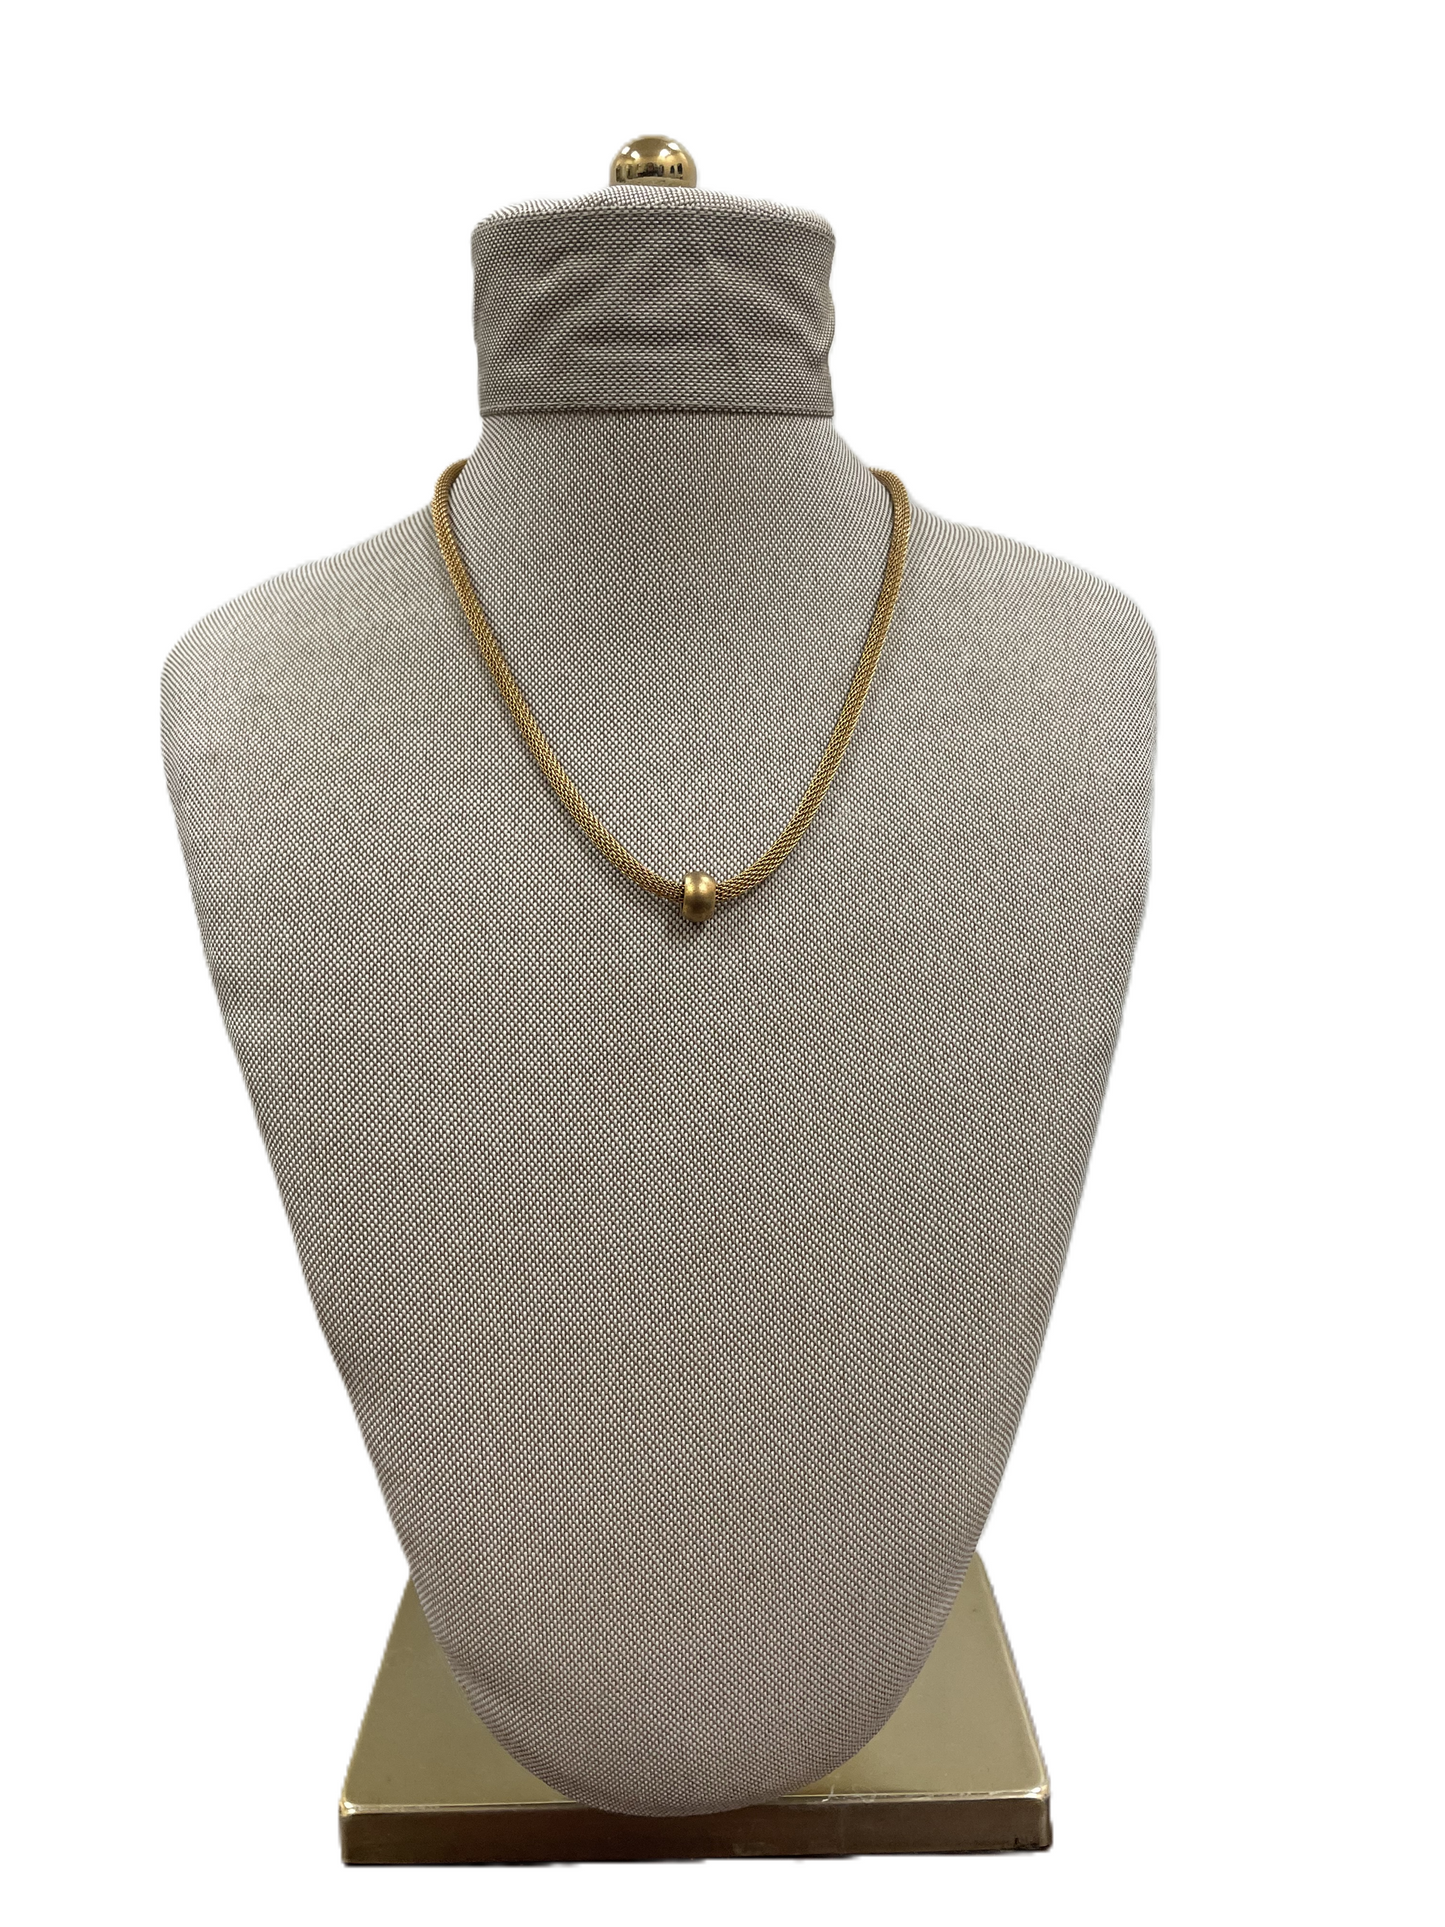 Necklace Chain By Erica Zap